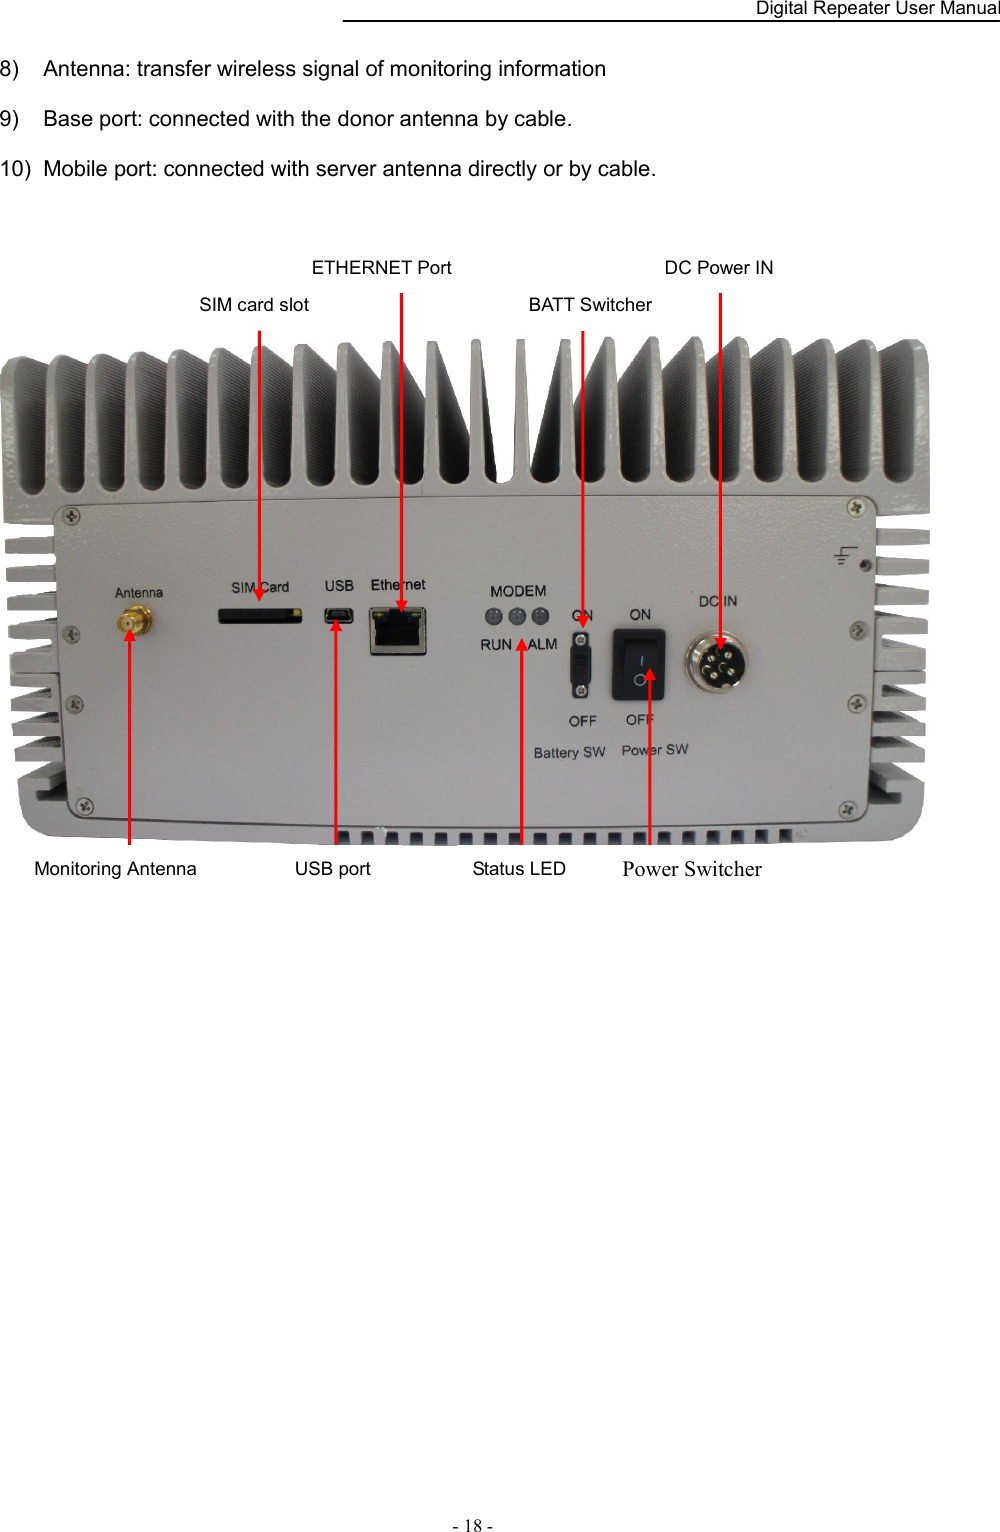    Digital Repeater User Manual  - 18 -   8)  Antenna: transfer wireless signal of monitoring information 9)  Base port: connected with the donor antenna by cable. 10)  Mobile port: connected with server antenna directly or by cable.     ETHERNET Port Monitoring Antenna  Status LED SIM card slot USB port  Power Switcher DC Power IN BATT Switcher 